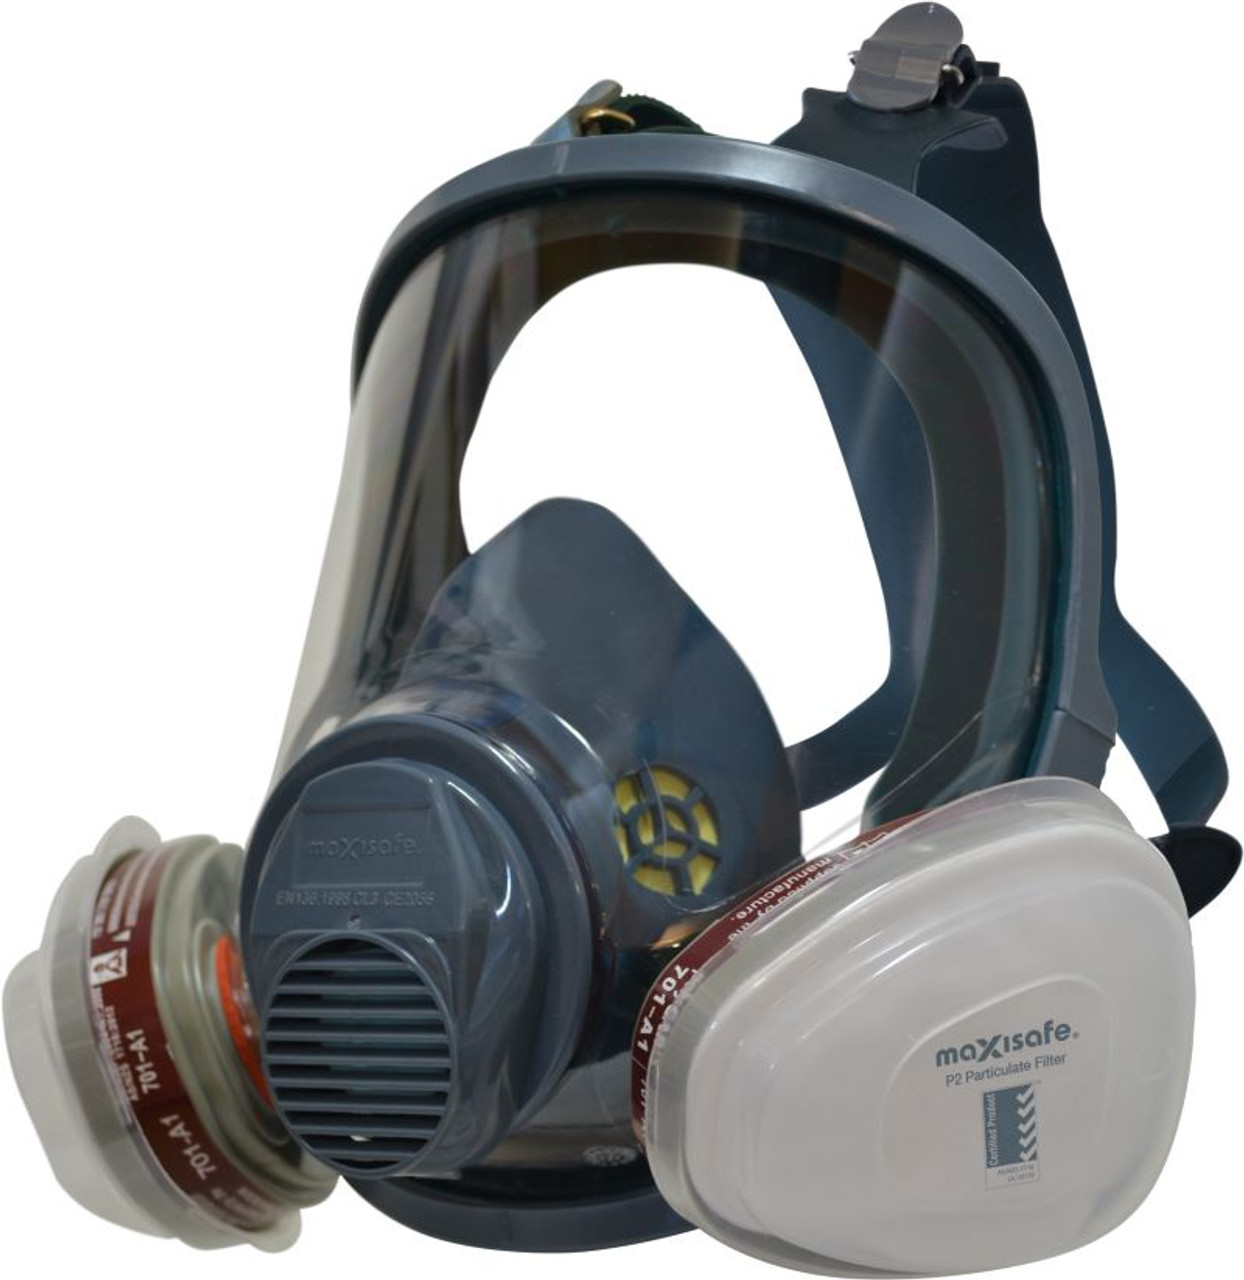 Maxiguard Full Face Silicone Respirator W/ A1P2 Cartridges-Large